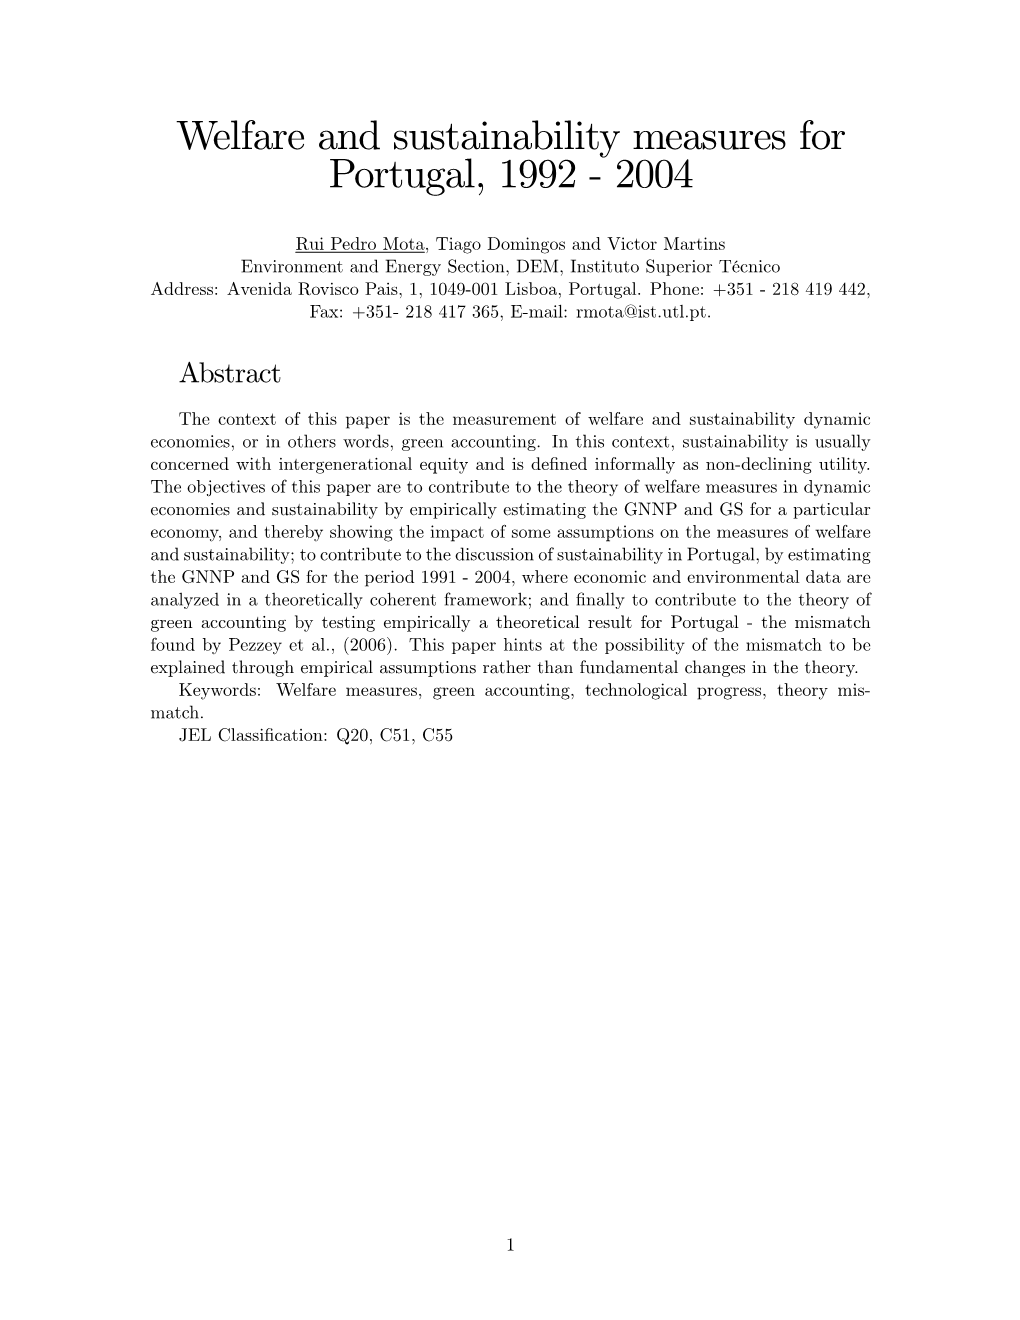 Welfare and Sustainability Measures for Portugal, 1992 ' 2004